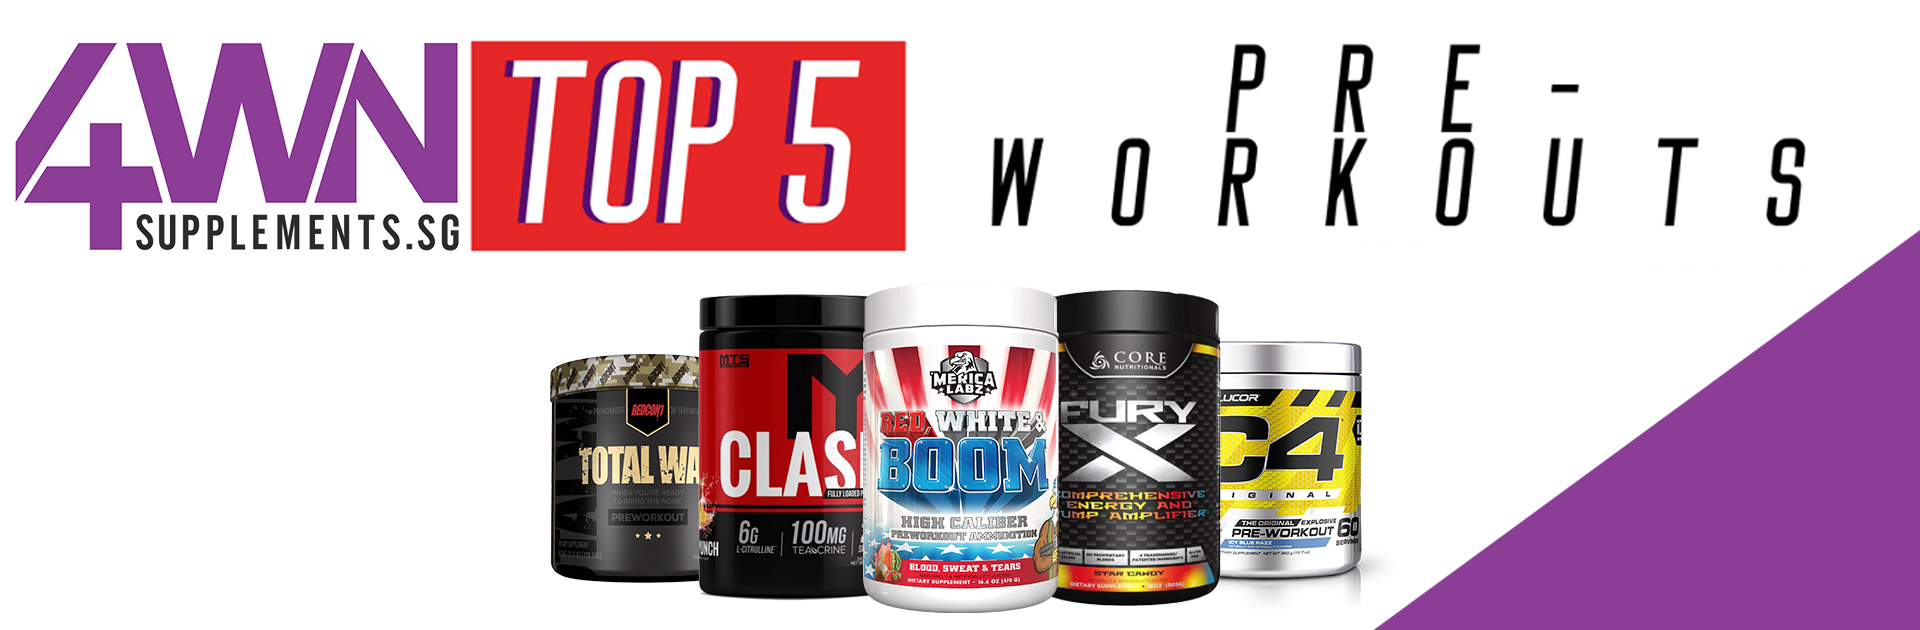 top 5 pre workouts 4WN Supplements